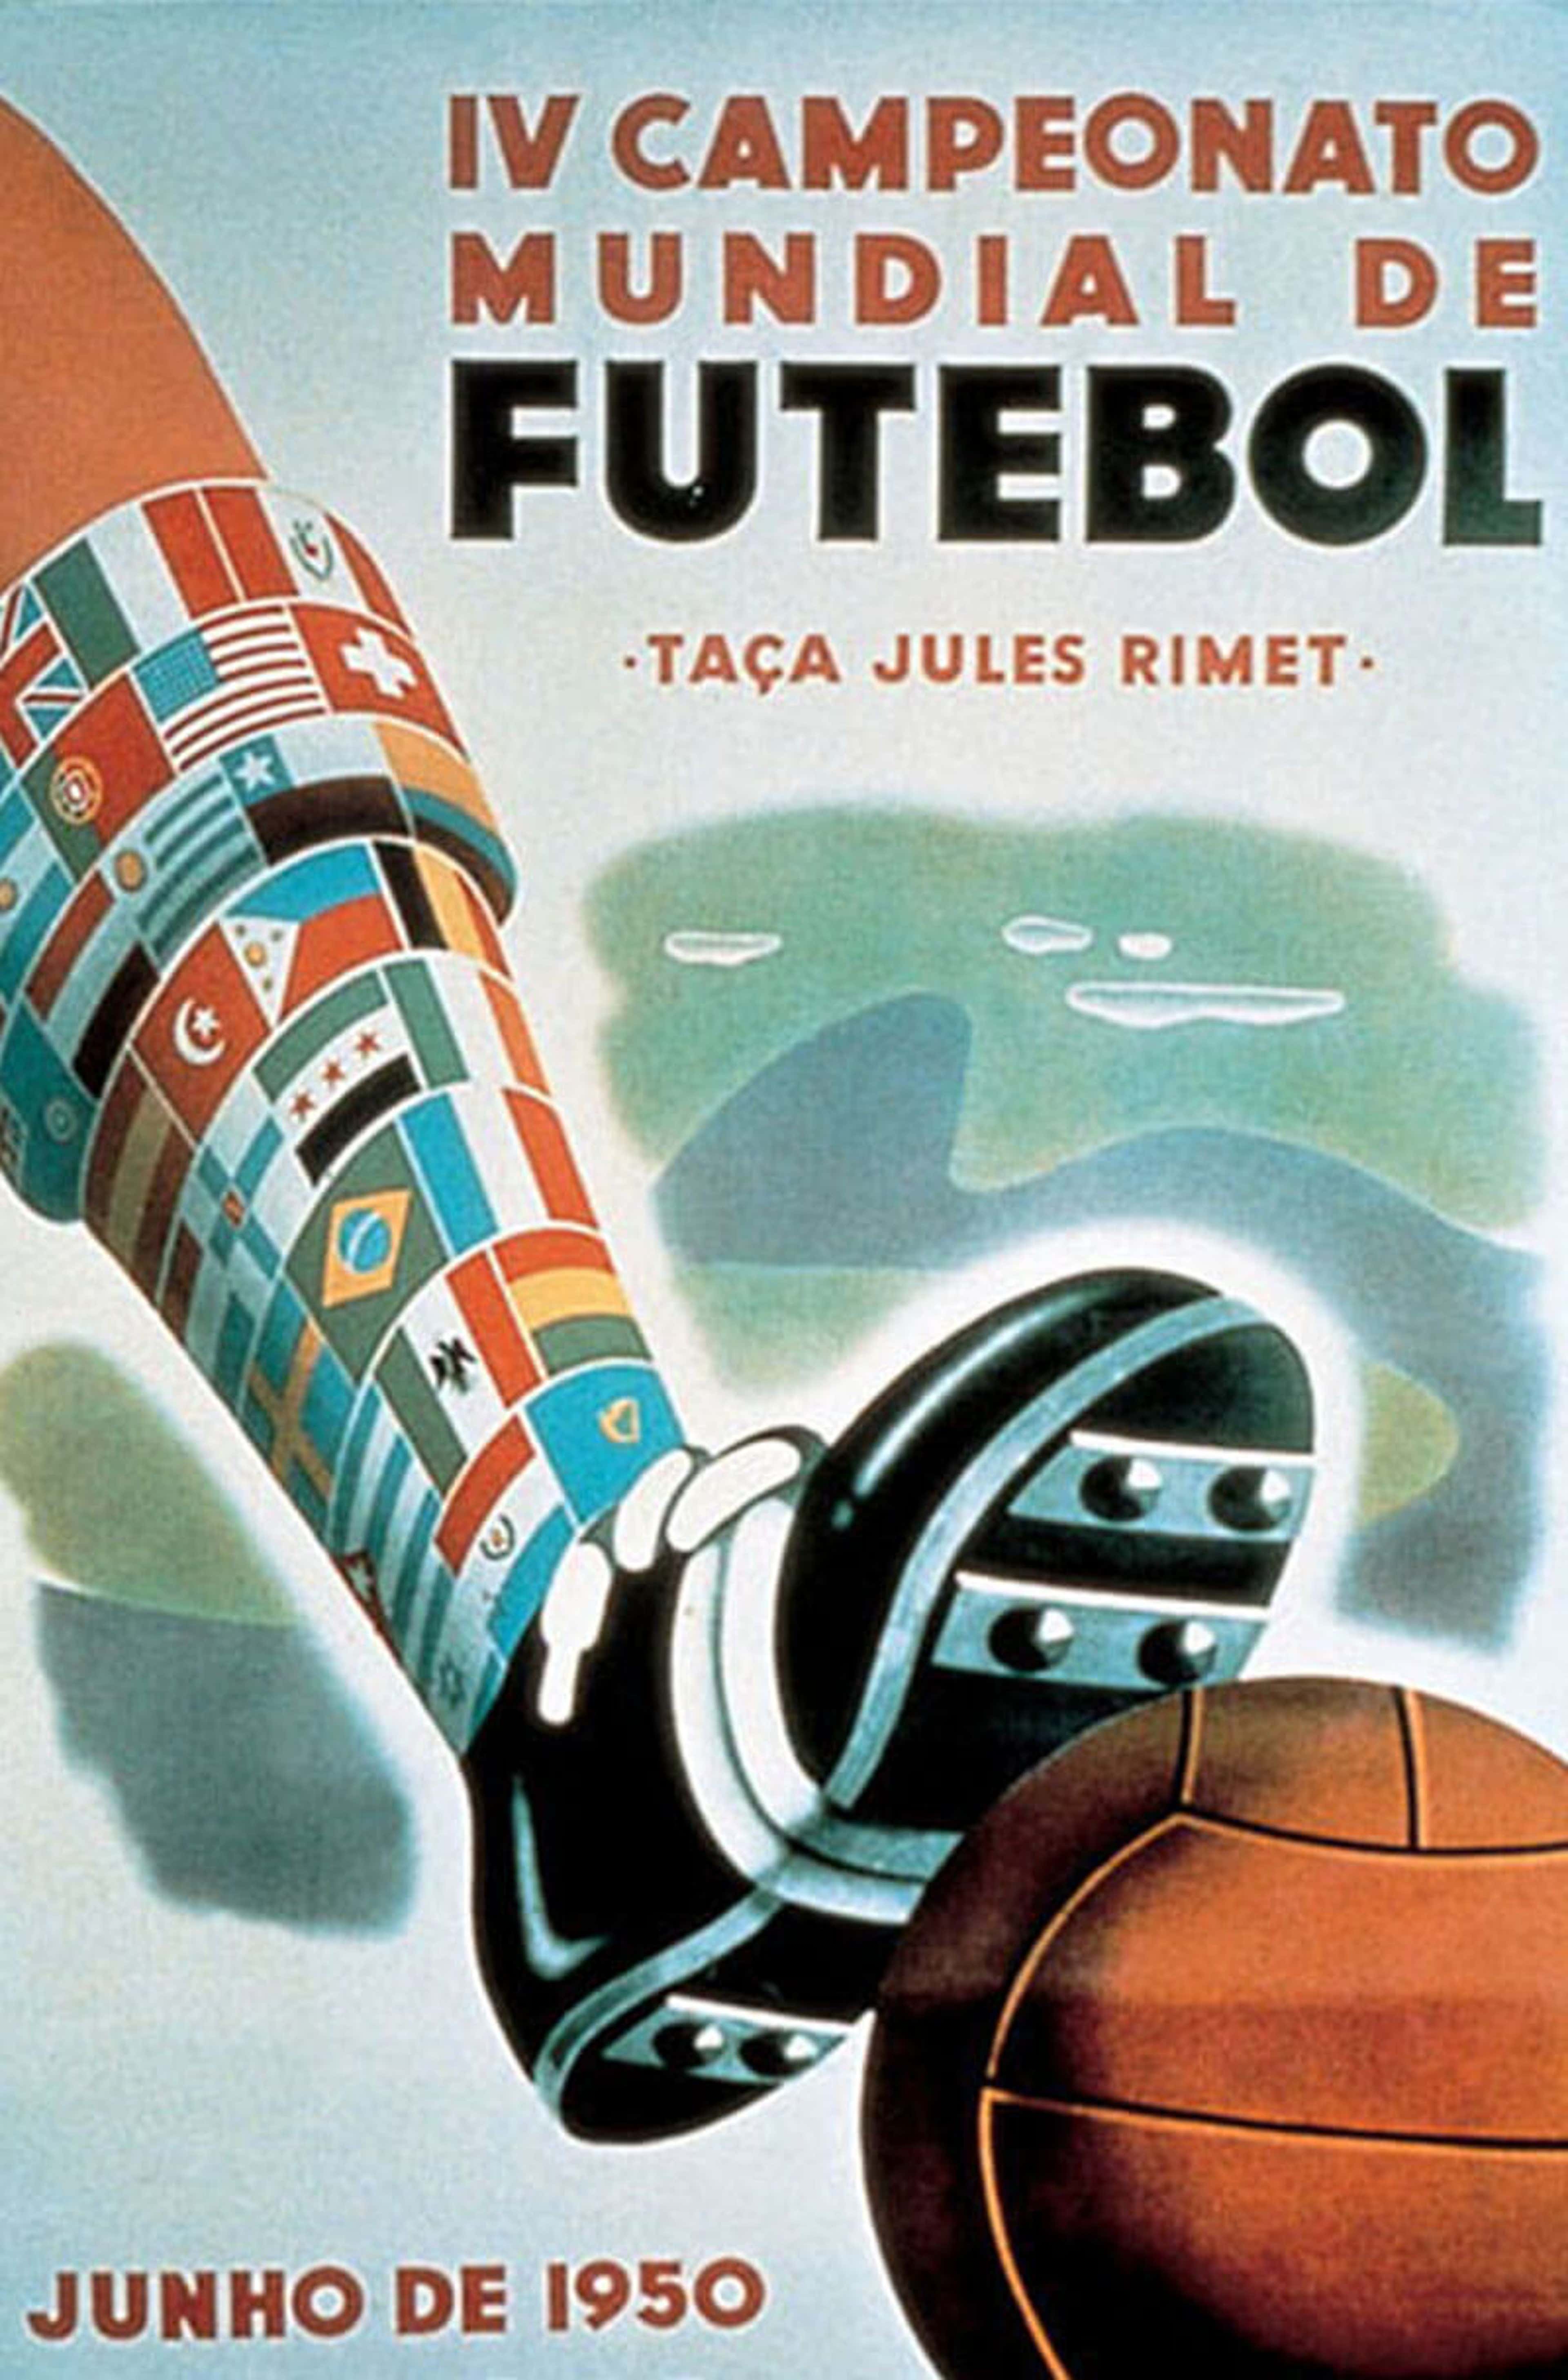 FIFA World Cup Logos: All the designs from 1930-2022